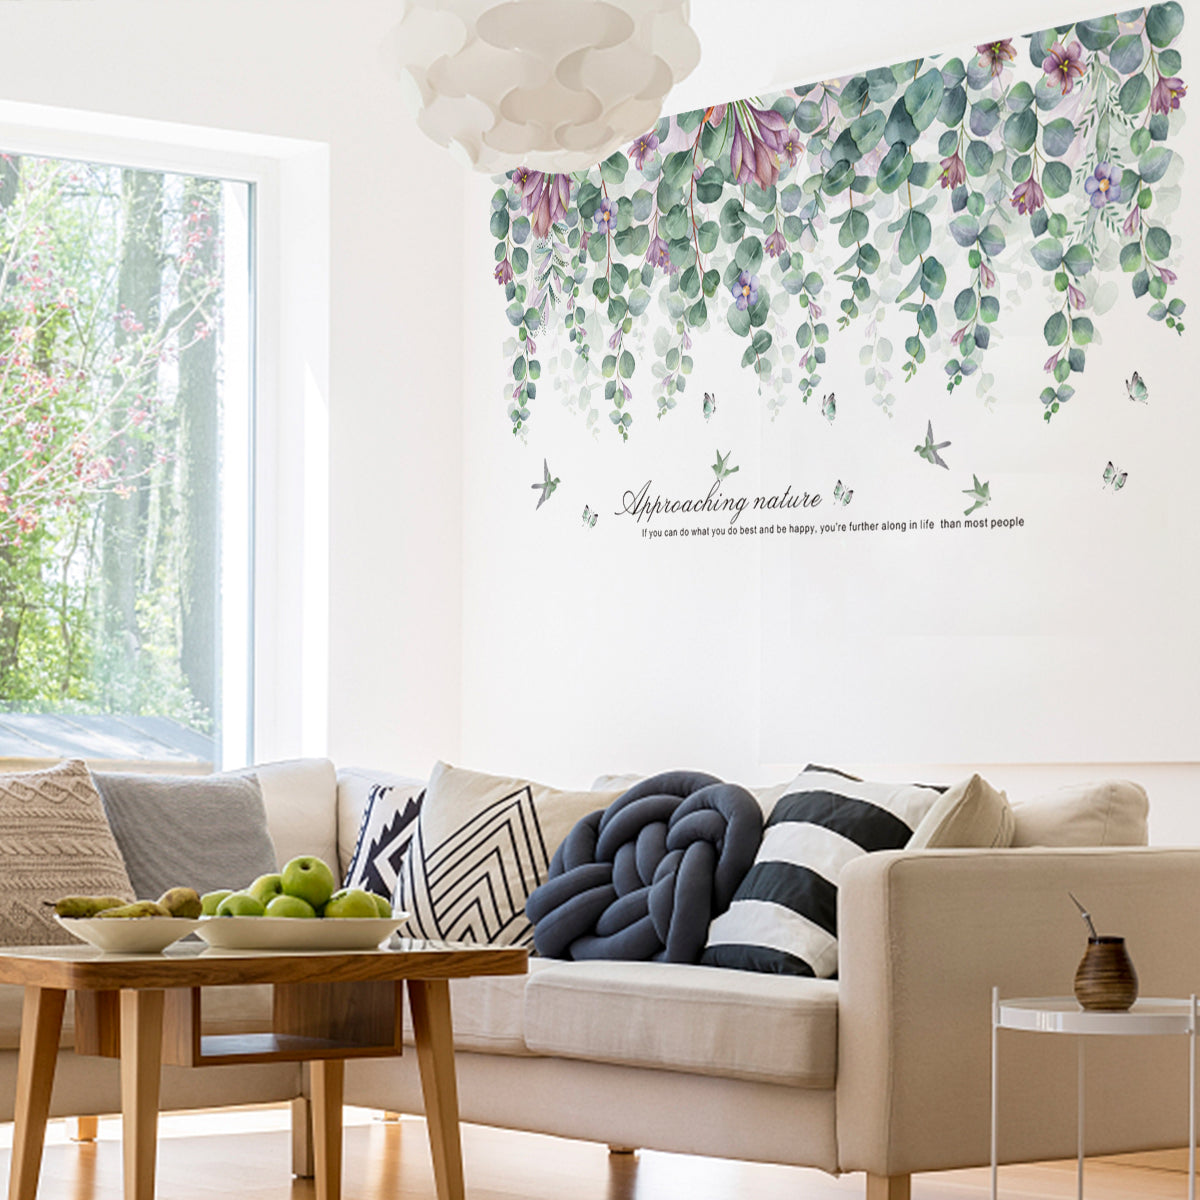 Tree Branch Leaves Removable Wall Decal PVC Large Sticker Mural Home Decor Art